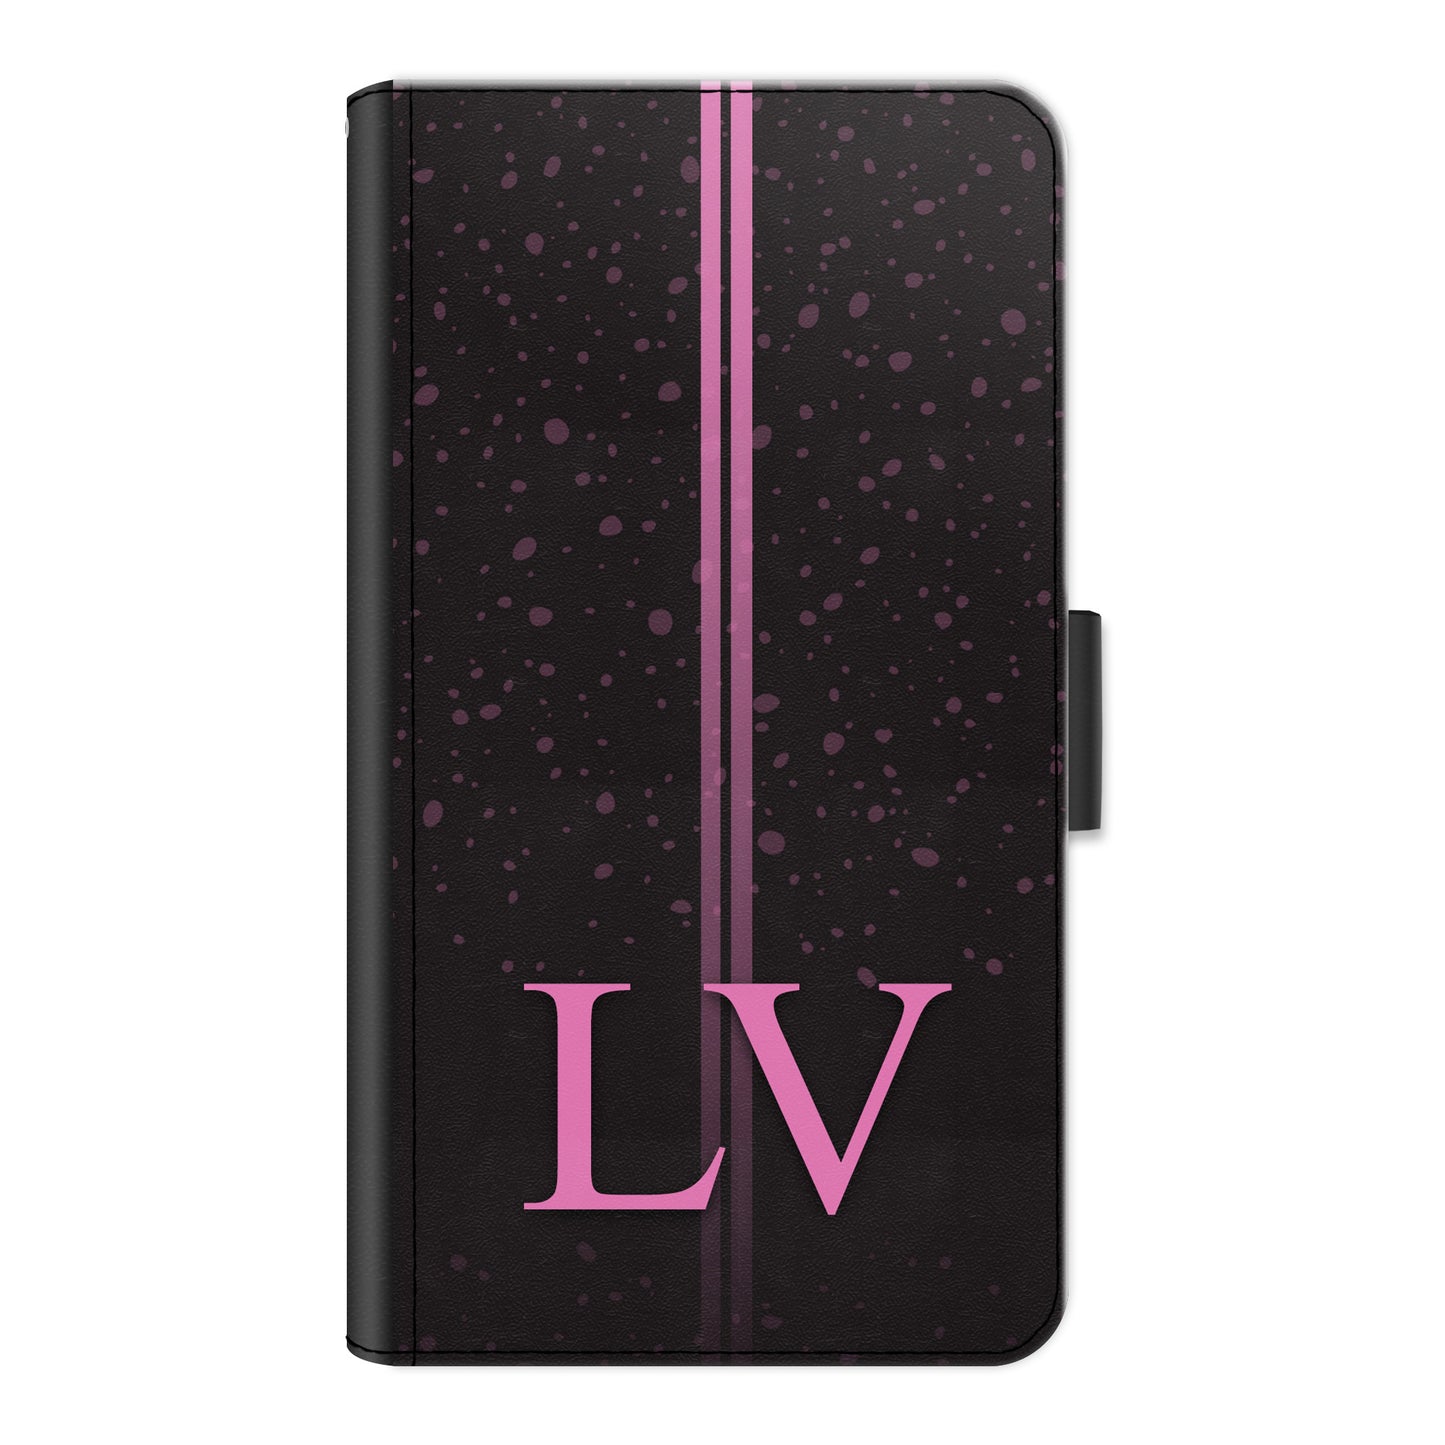 Personalised Nokia Phone Leather Wallet with Pink Initials, Pin Stripes and Droplets on Black